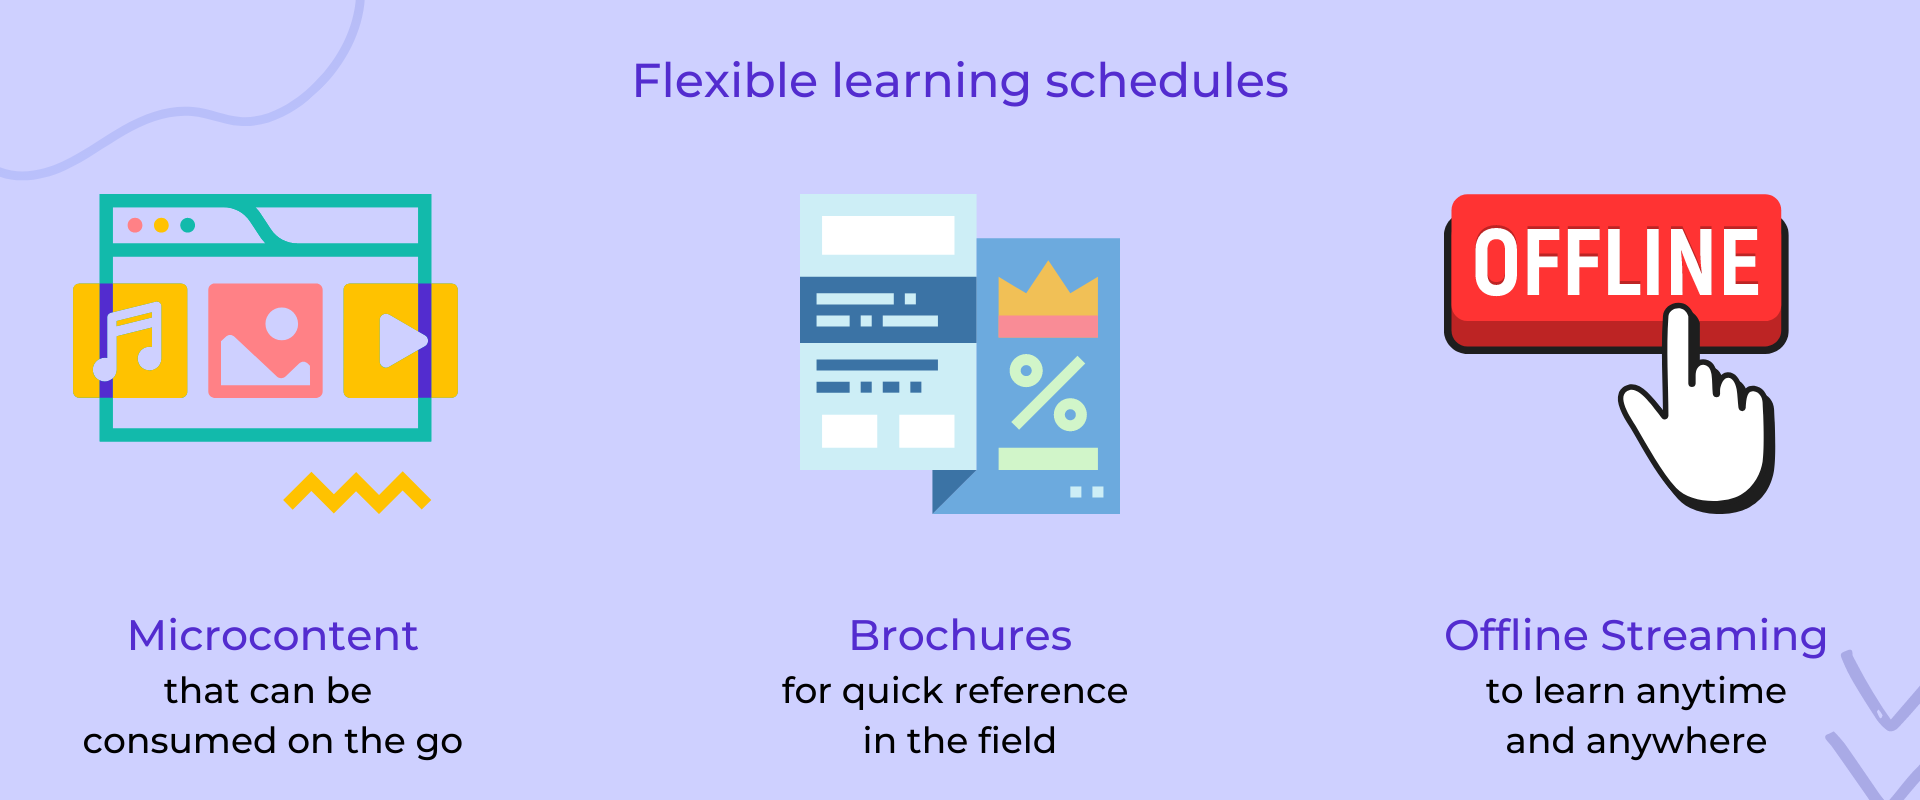 Flexible learning schedules